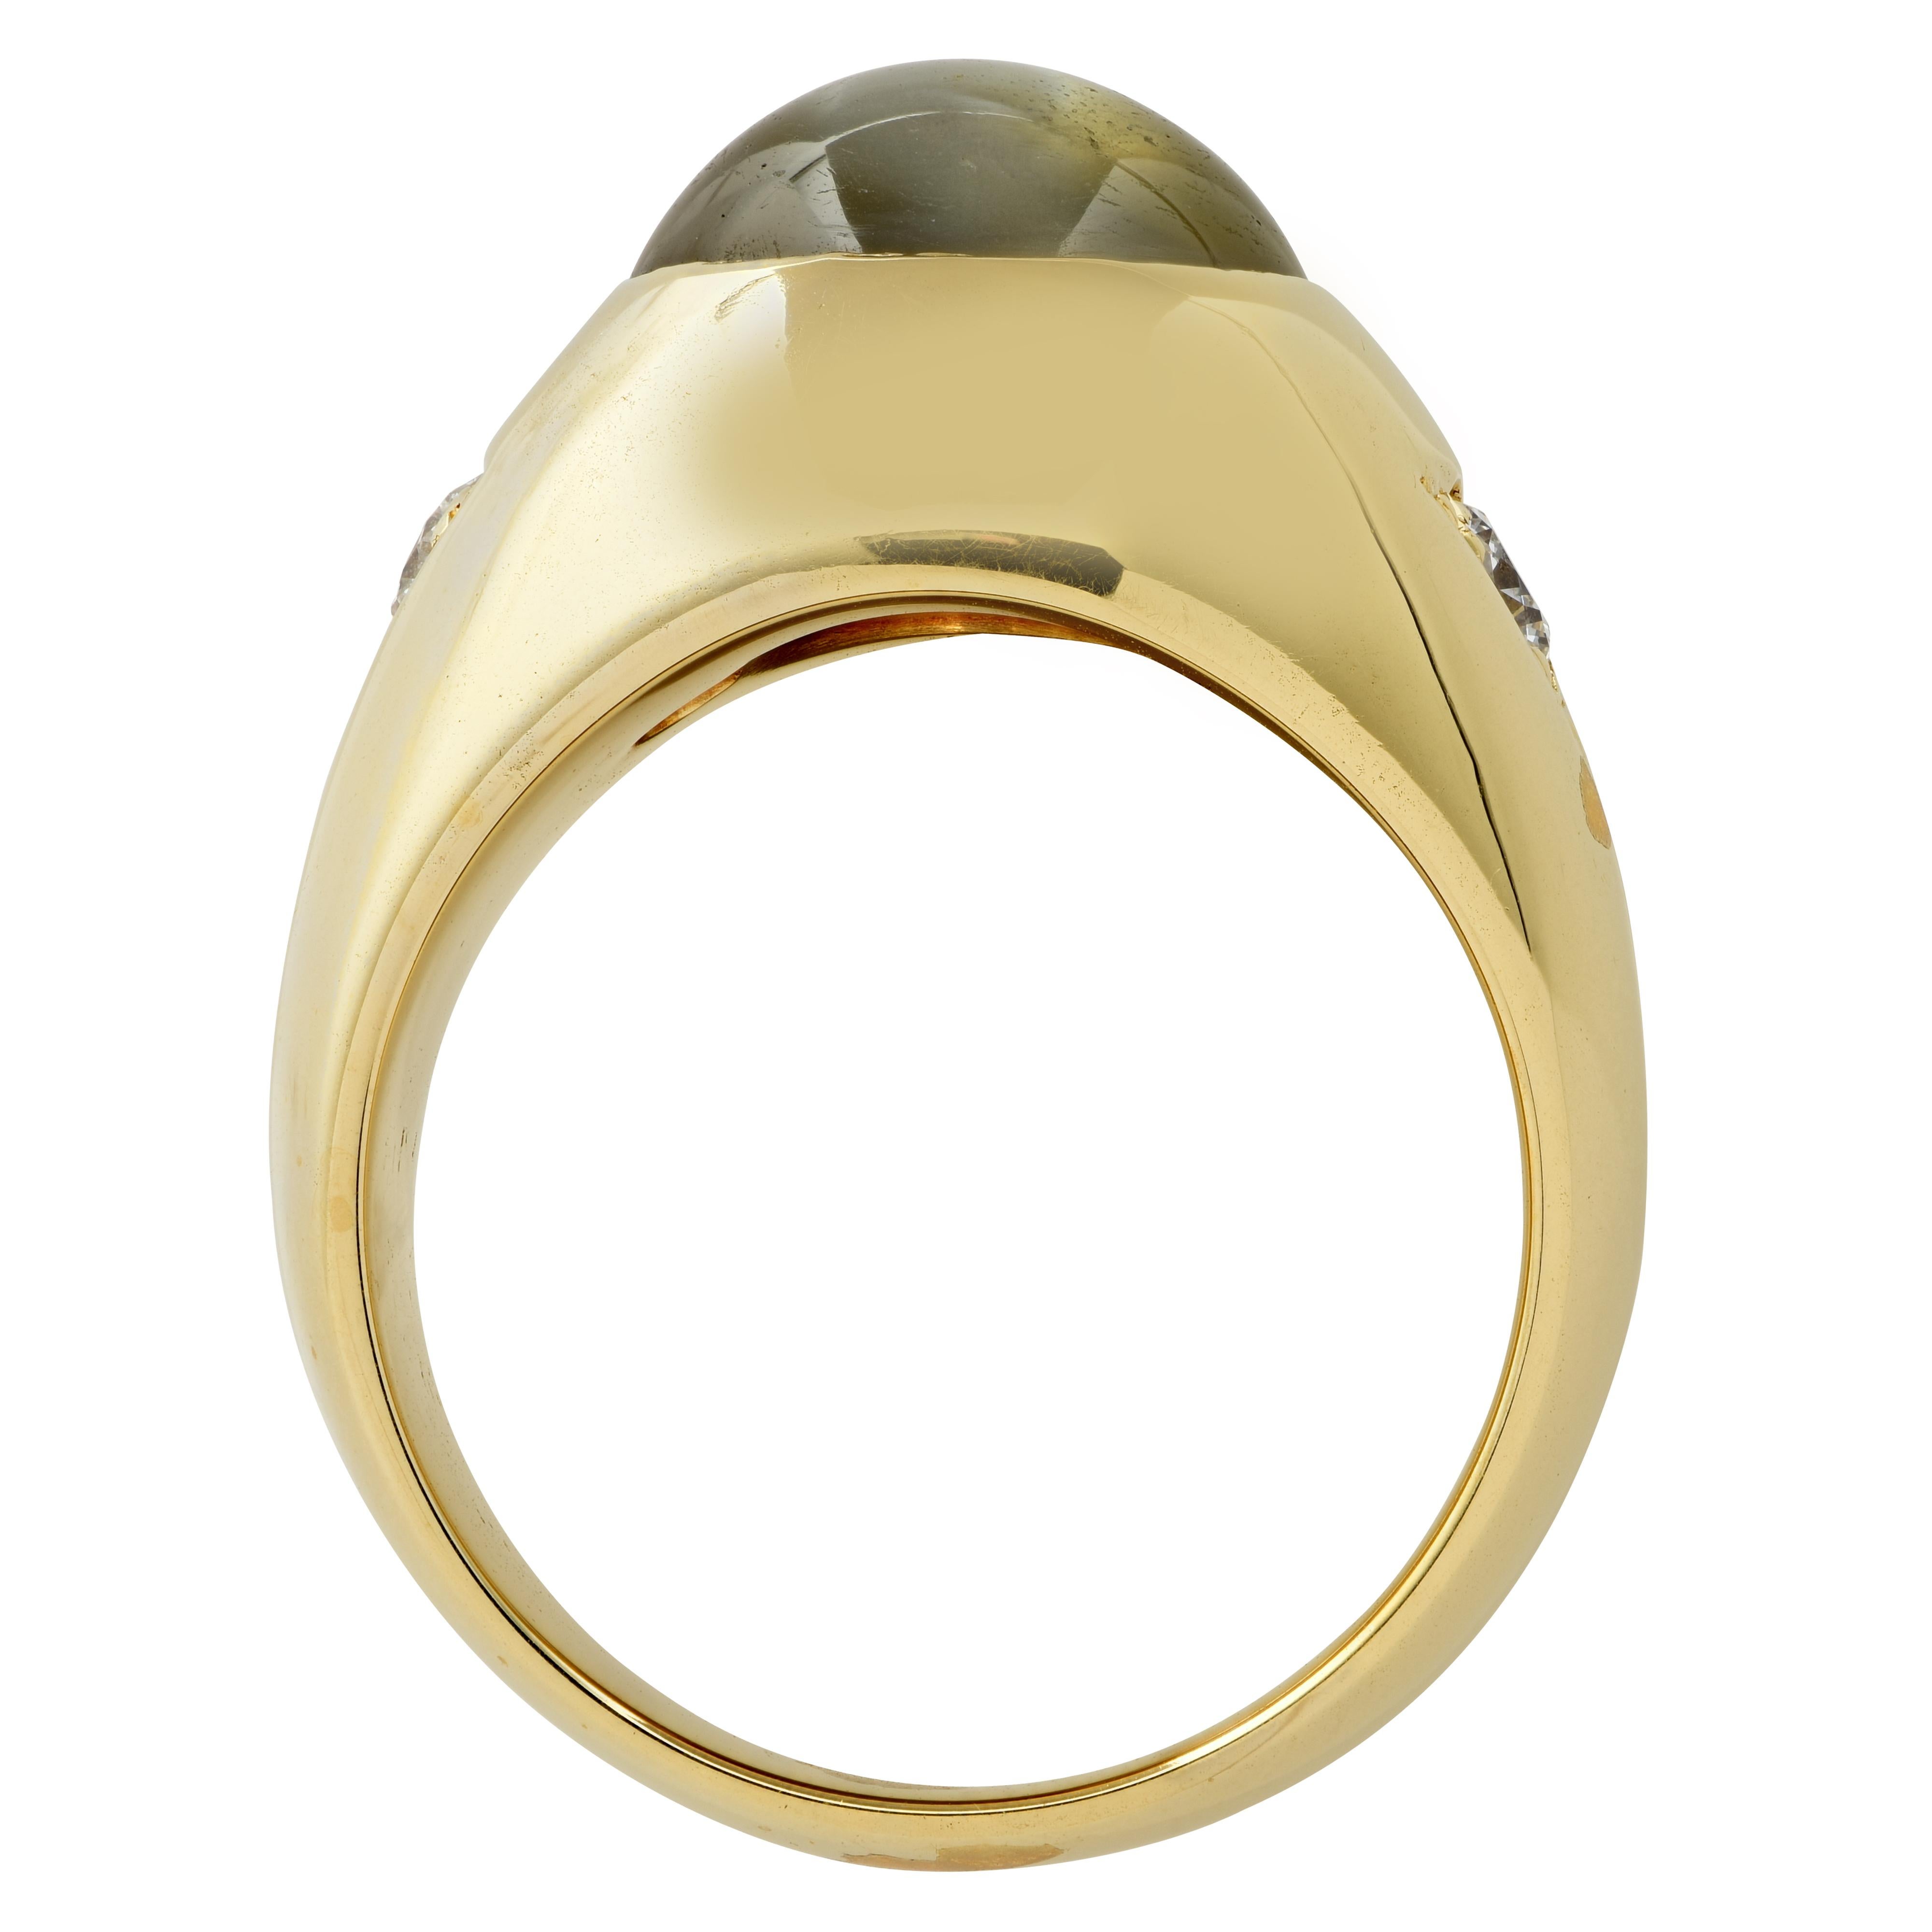 Men’s pinkie ring crafted in 18 karat yellow gold showcasing a spectacular chrysoberyl cat’s eye cabochon weighing approximately 8 carats, accompanied by two round brilliant cut diamonds weighing approximately .30 carats total, G color, VS clarity.